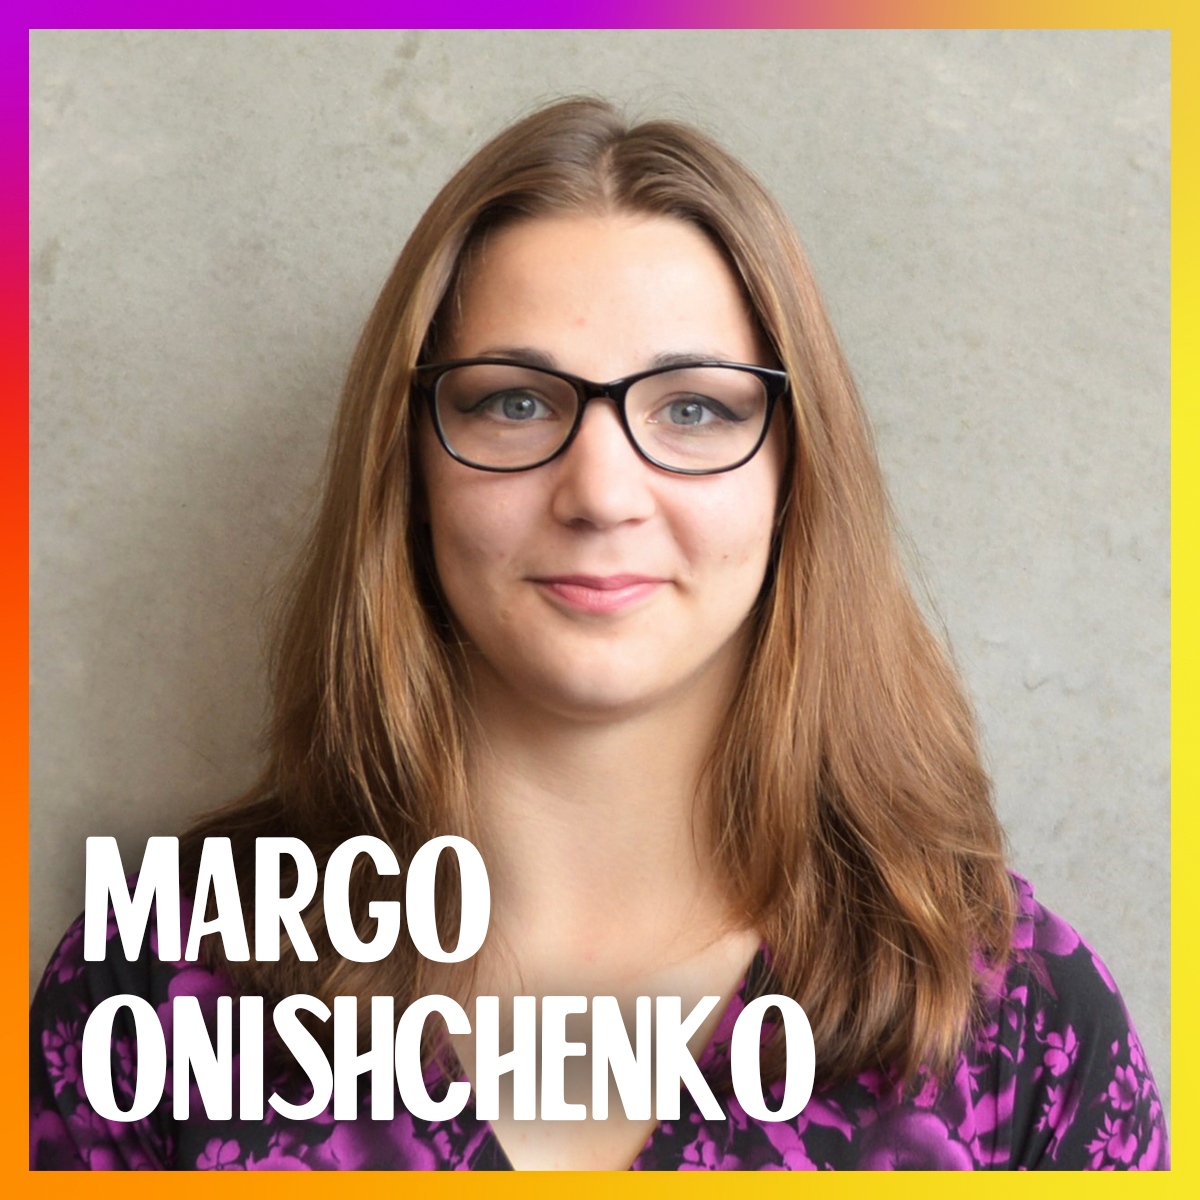 🔊NEW EPISODE: Margo Onishchenko tells @Tim_McCready about migrating from Russia as a young woman, and her journey to standing as the @actparty candiate for Maungakiekie. 🎧LISTEN, FOLLOW & SHARE: linktr.ee/onehungafm